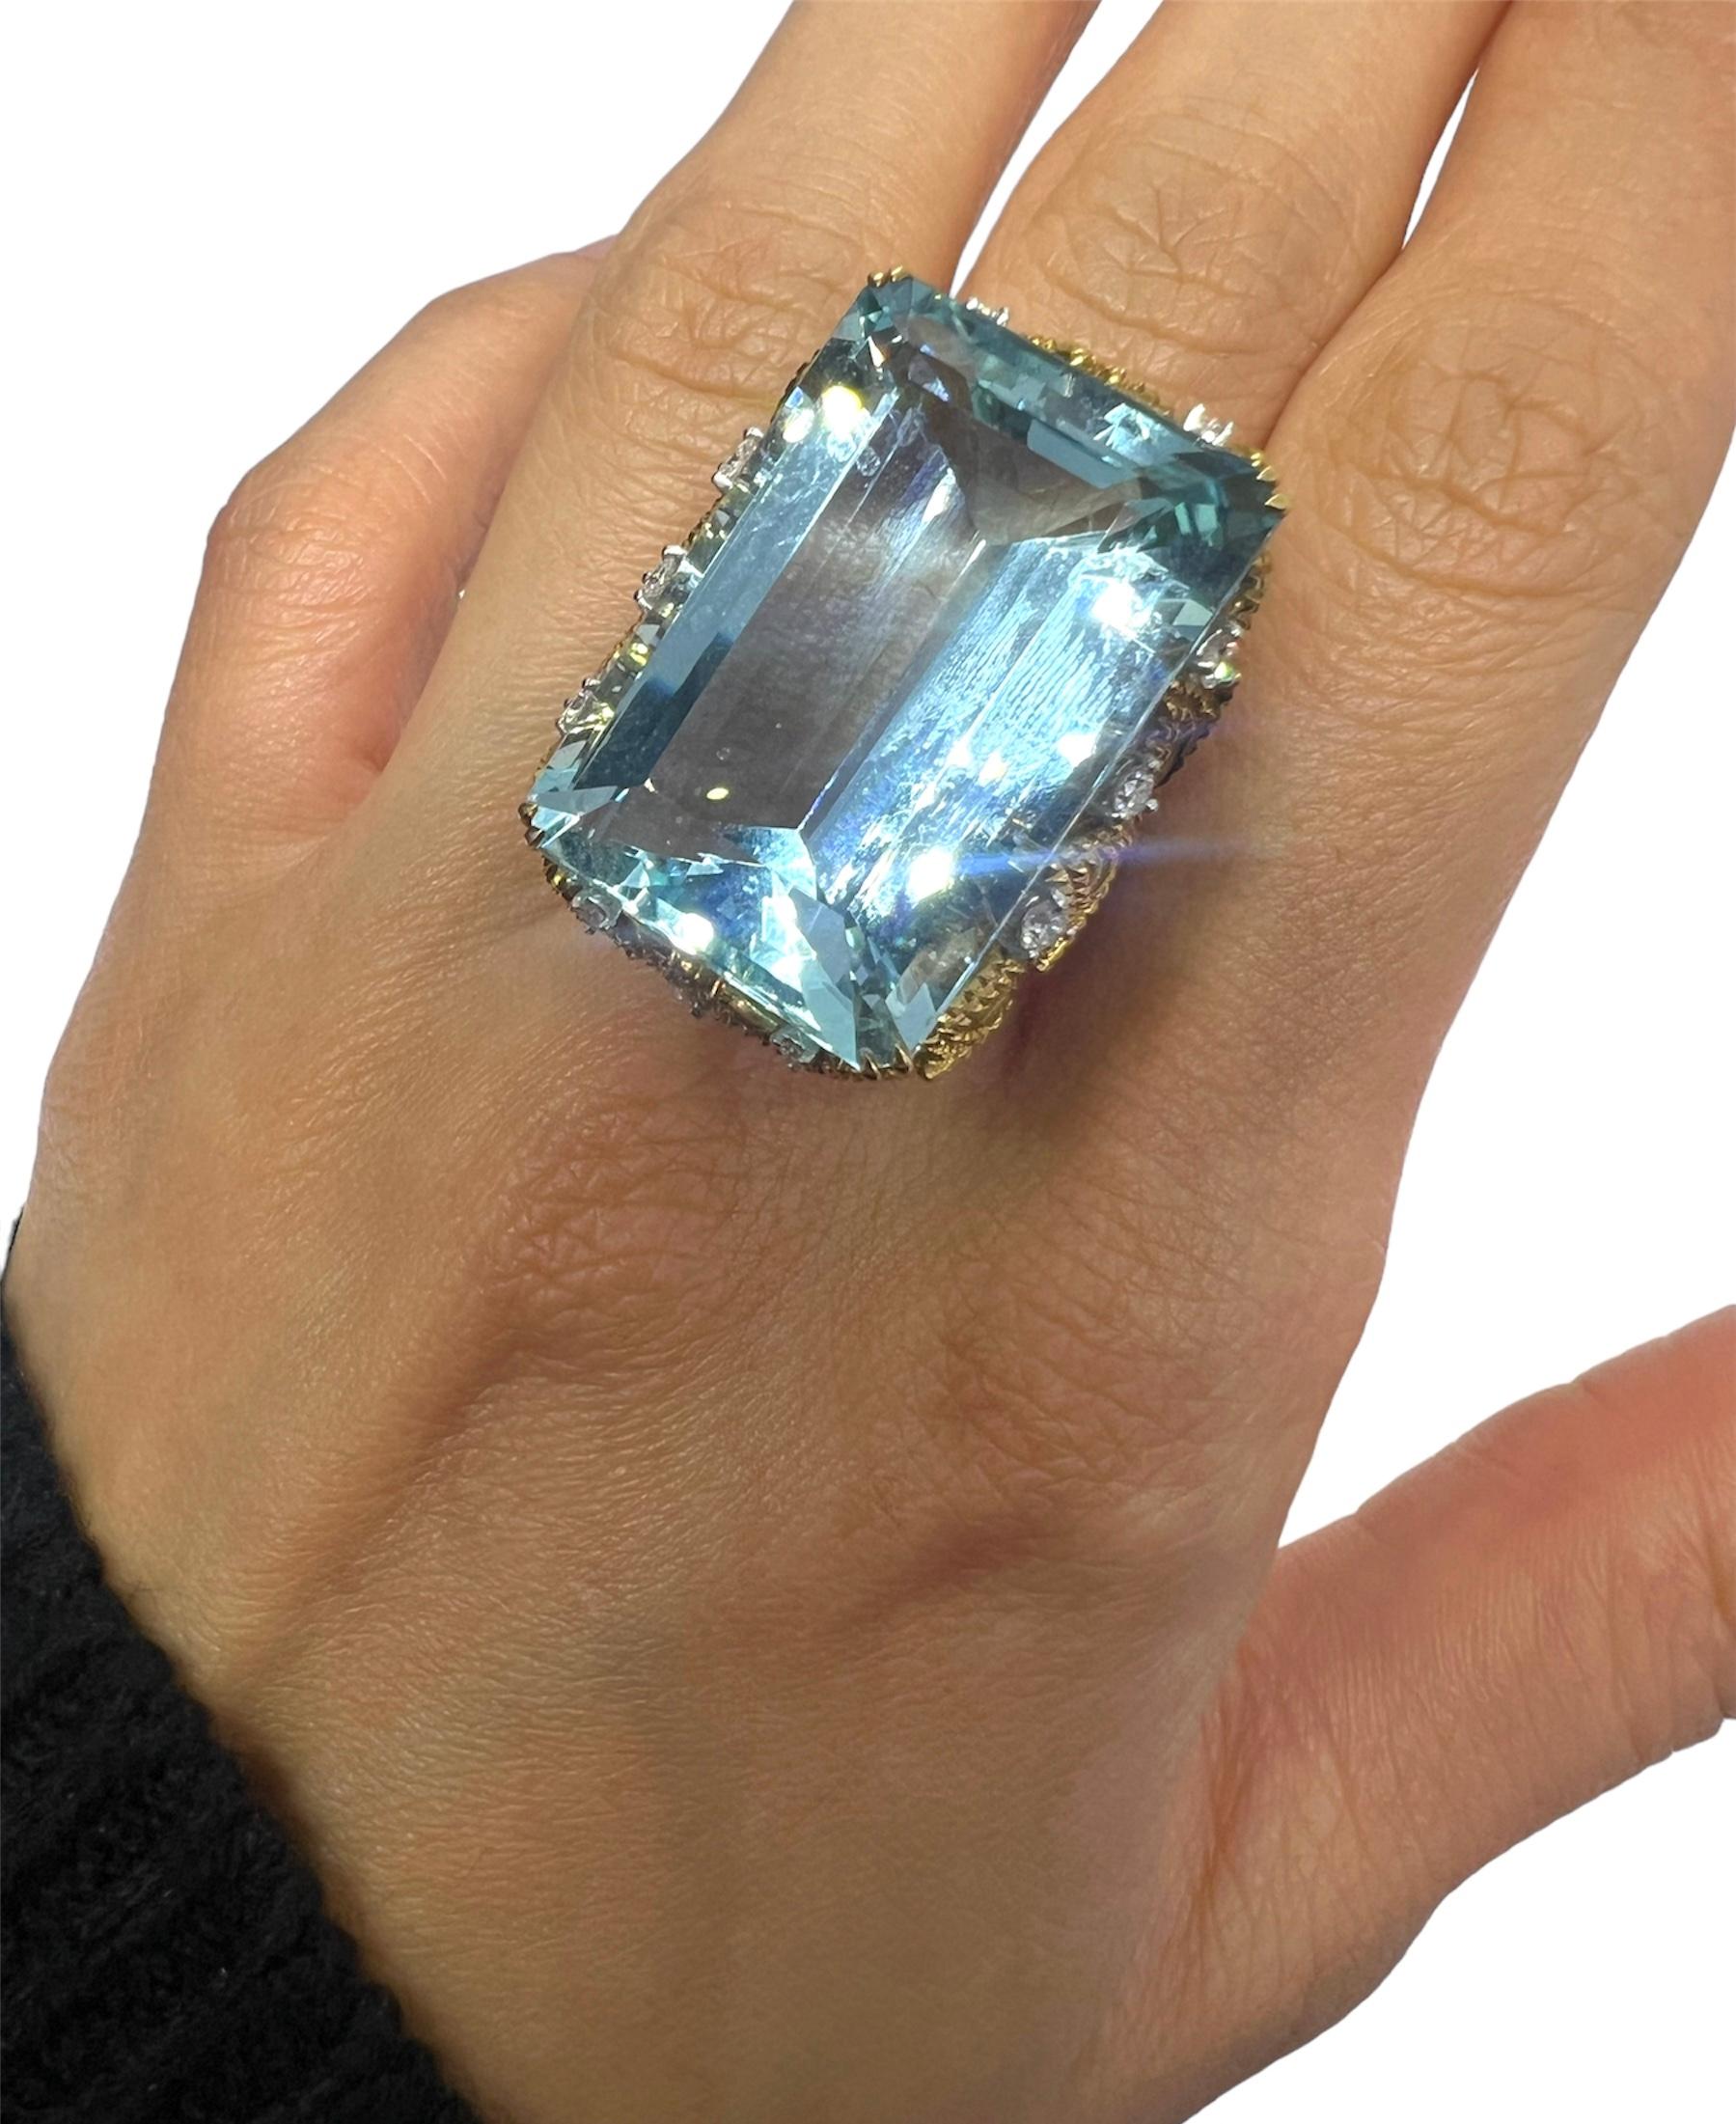 18K yellow gold ring with 42.59 carat aquamarine and 0.64 carat diamonds.

Sophia D by Joseph Dardashti LTD has been known worldwide for 35 years and are inspired by classic Art Deco design that merges with modern manufacturing techniques.